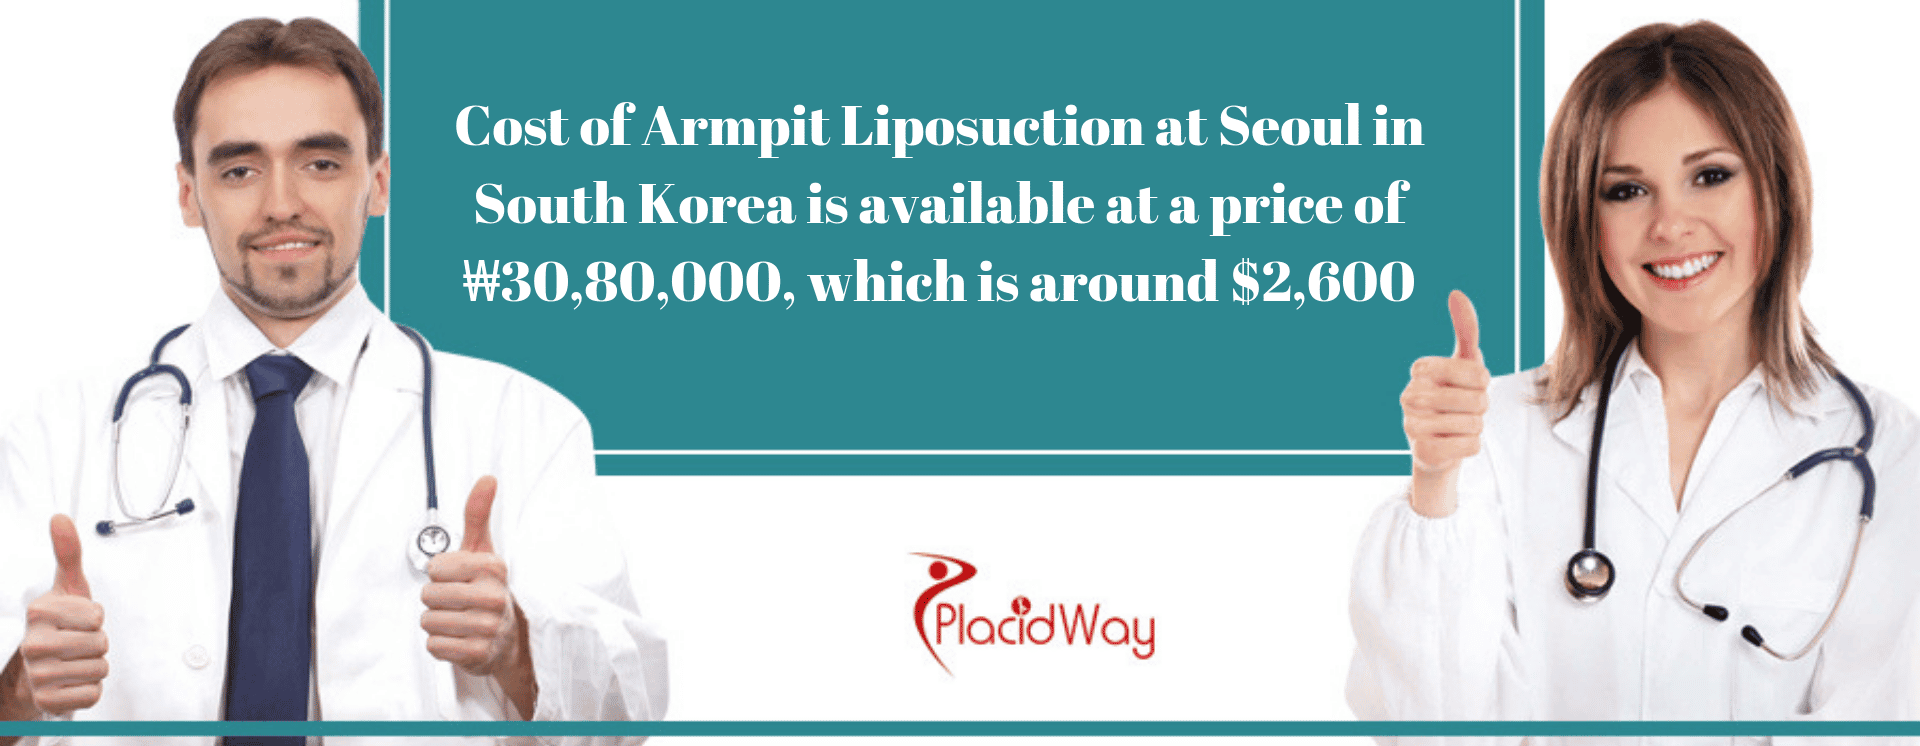 Cost of Armpit Liposuction at Seoul in South Korea is available at a price of ₩30,80,000, which is around $2,600